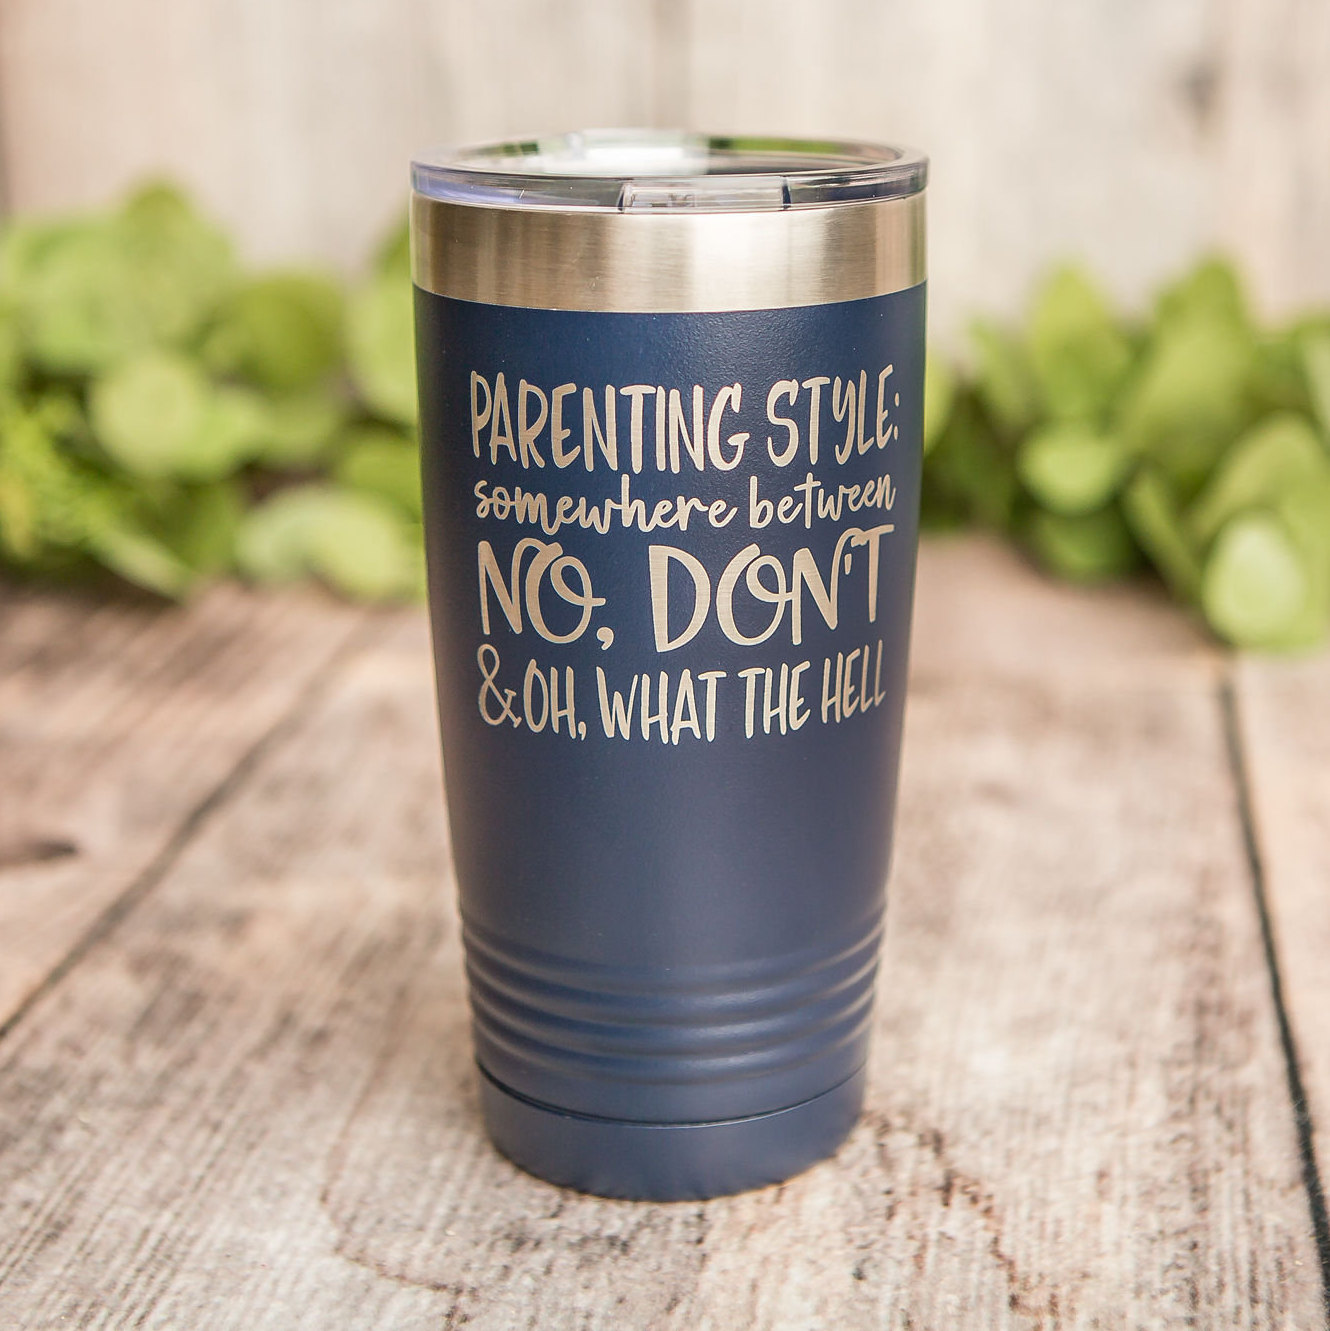 https://3cetching.com/wp-content/uploads/2020/09/parenting-style-engraved-stainless-steel-tumbler-funny-adult-humor-gift-adult-mugs-for-women-5f5fb0e1.jpg